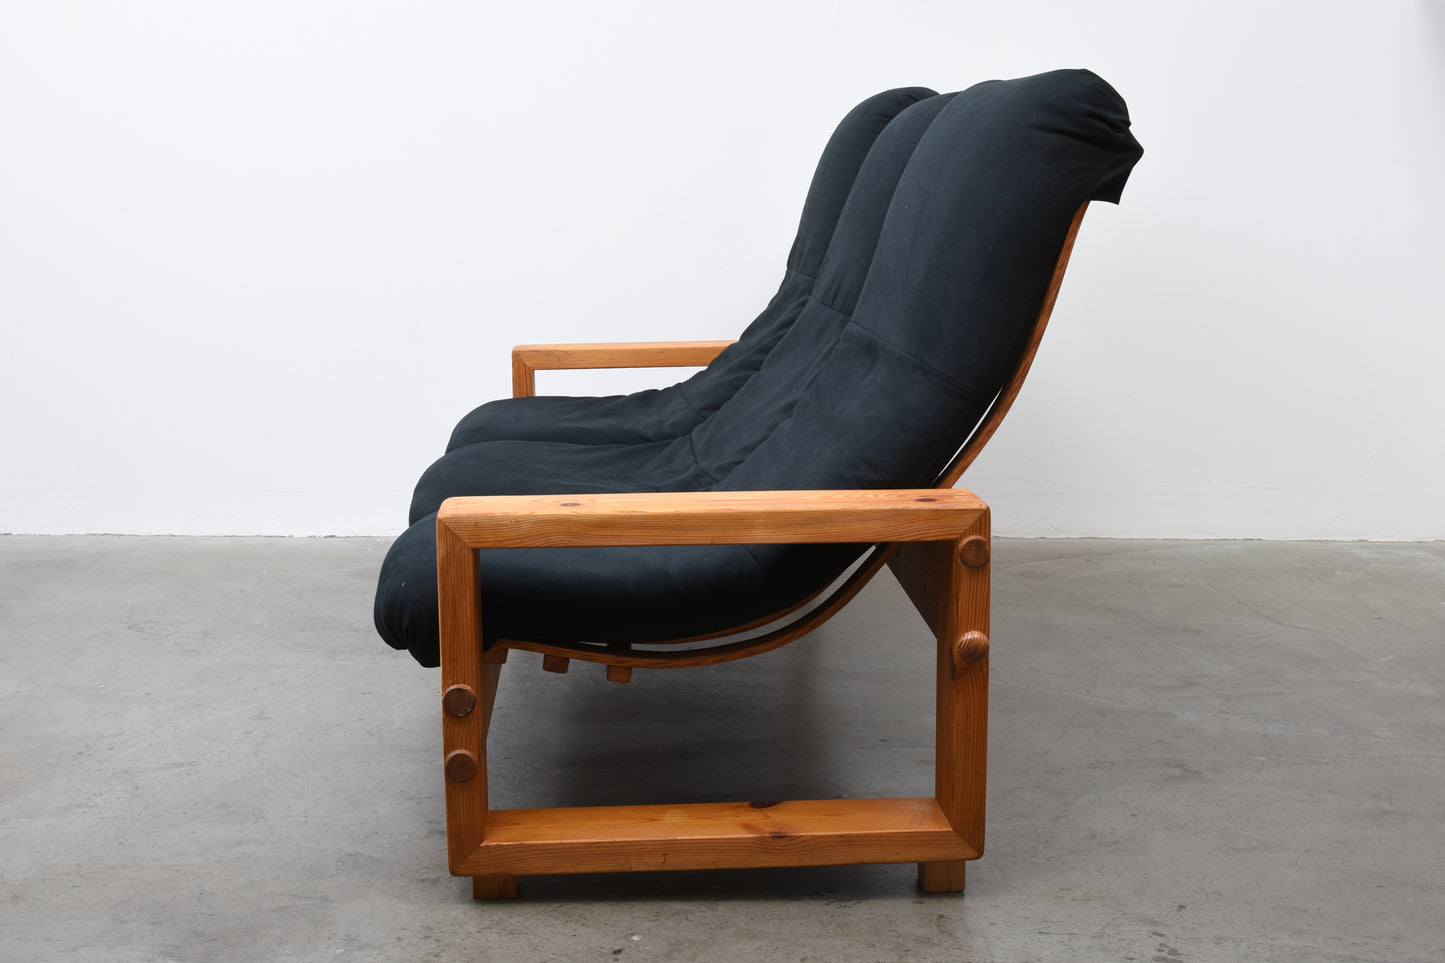 1970s reclining three seater by Leif Wikner